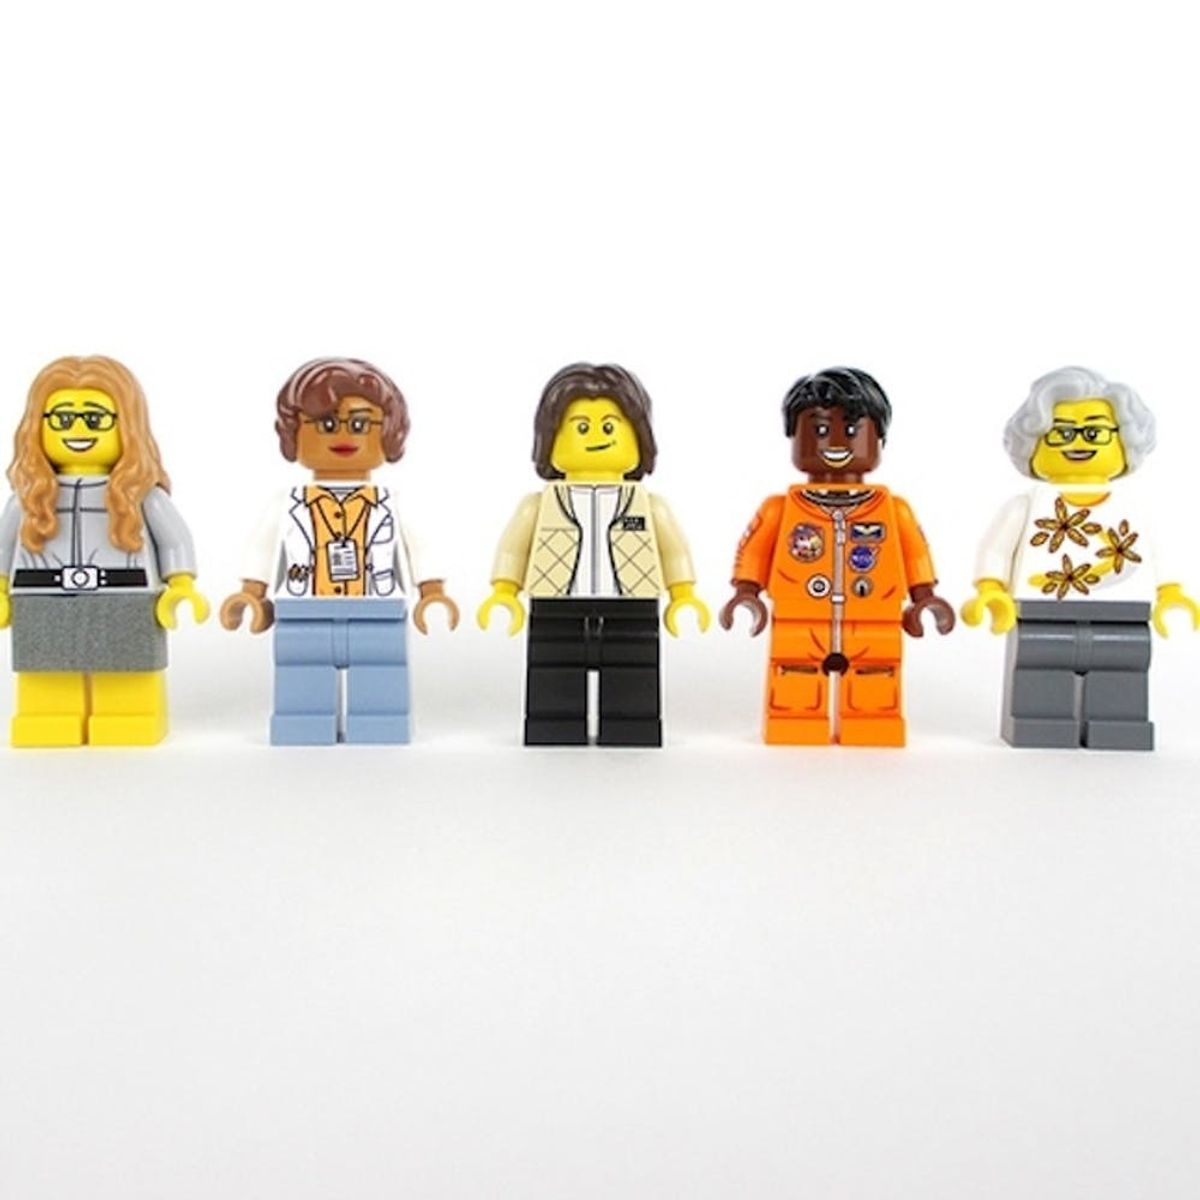 Introducing the LEGO Set Every Girl in America Needs